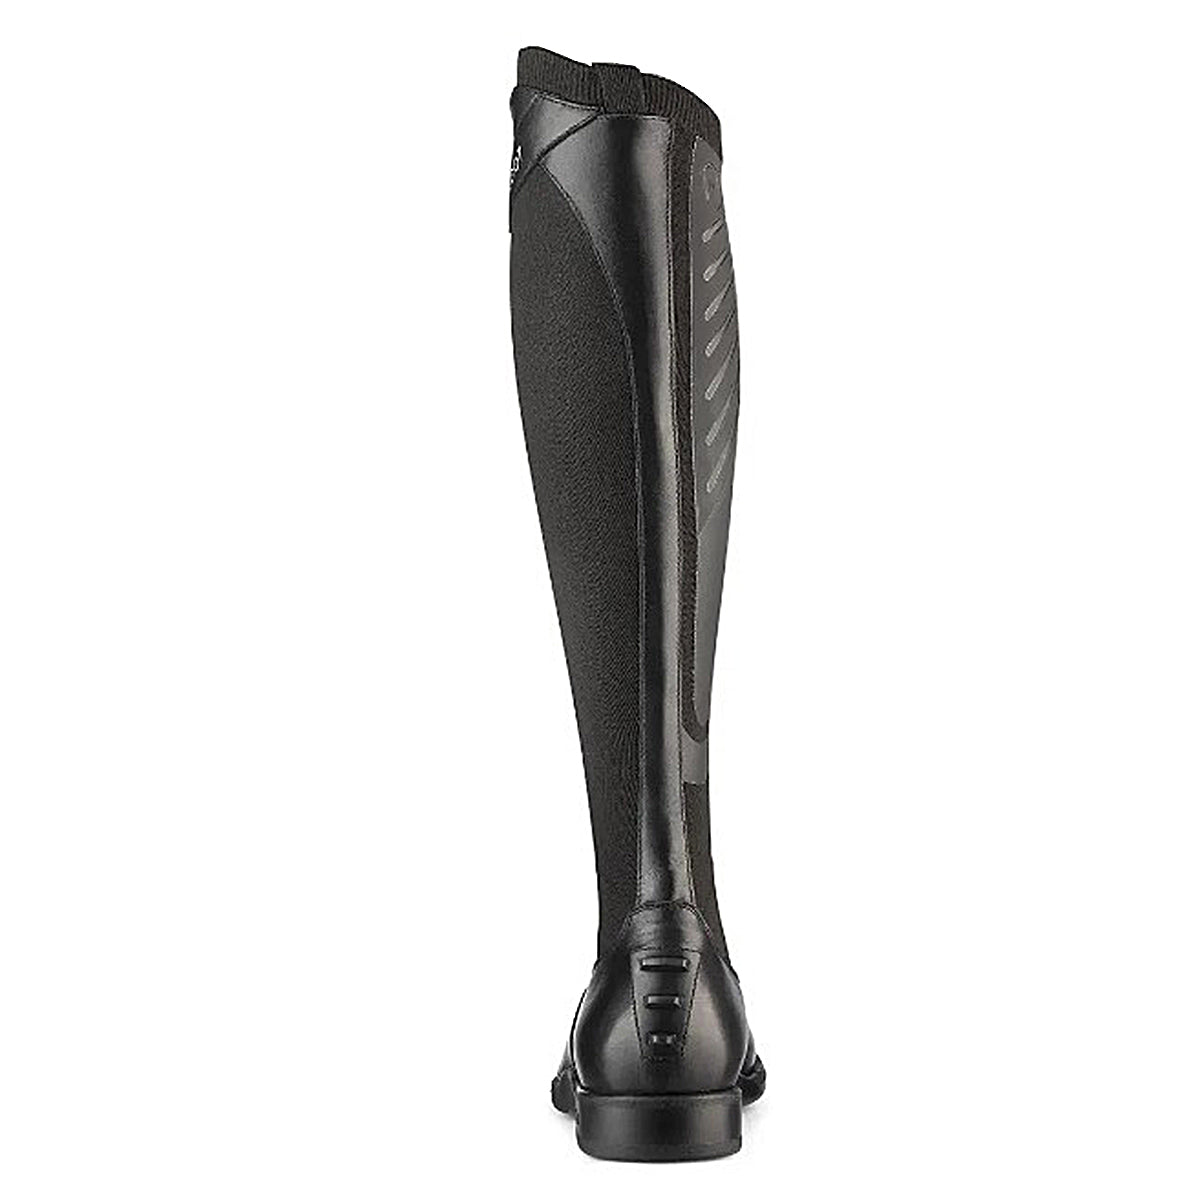 EGO 7 Contact Tall Boot